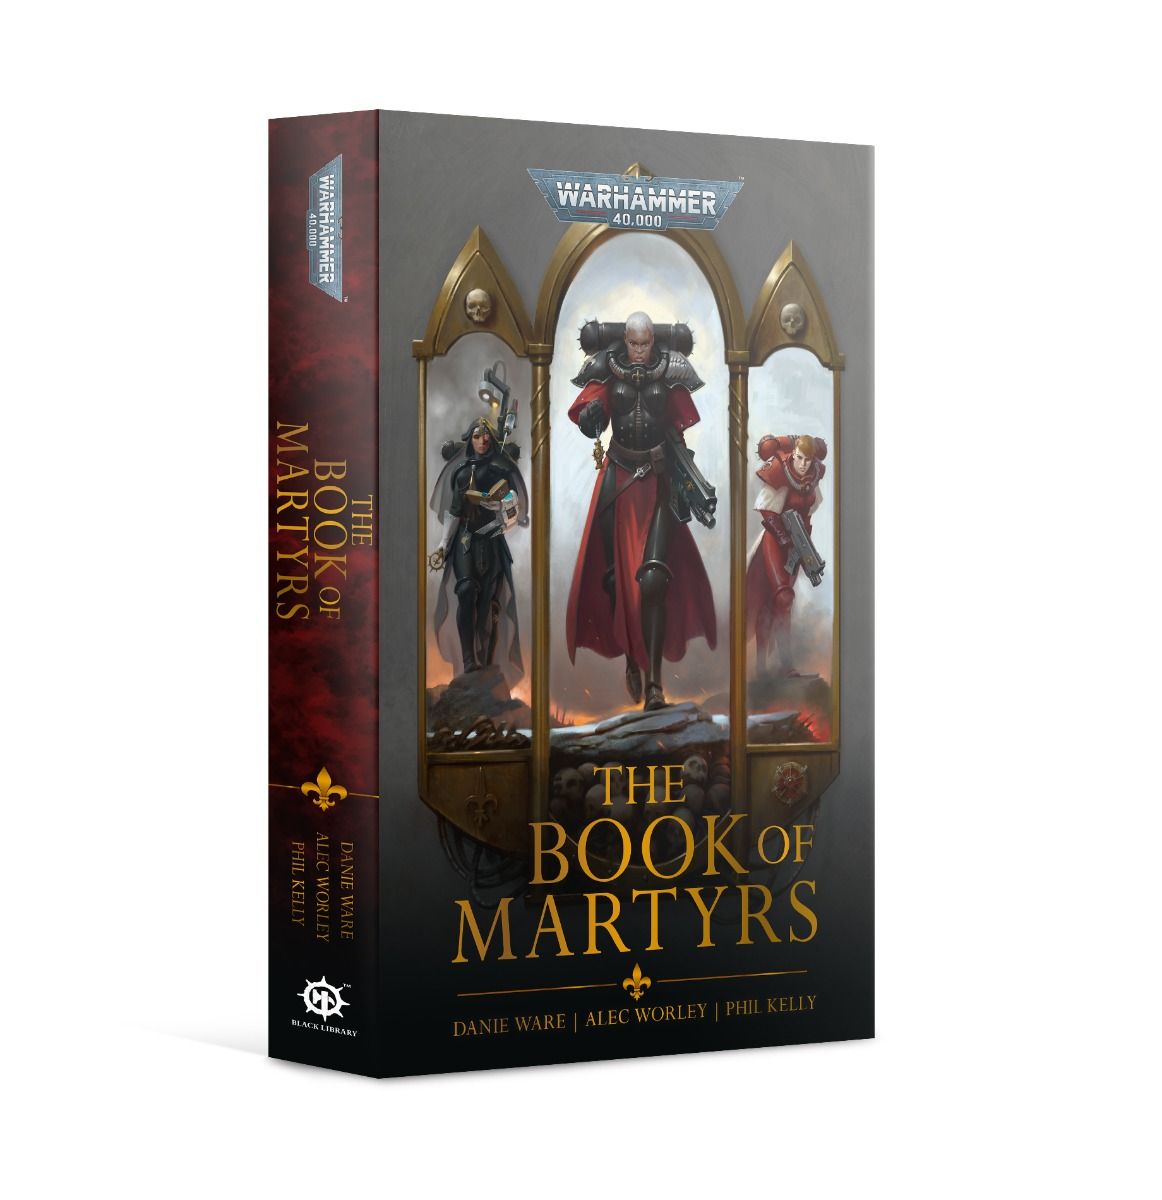 THE BOOK OF MARTYRS